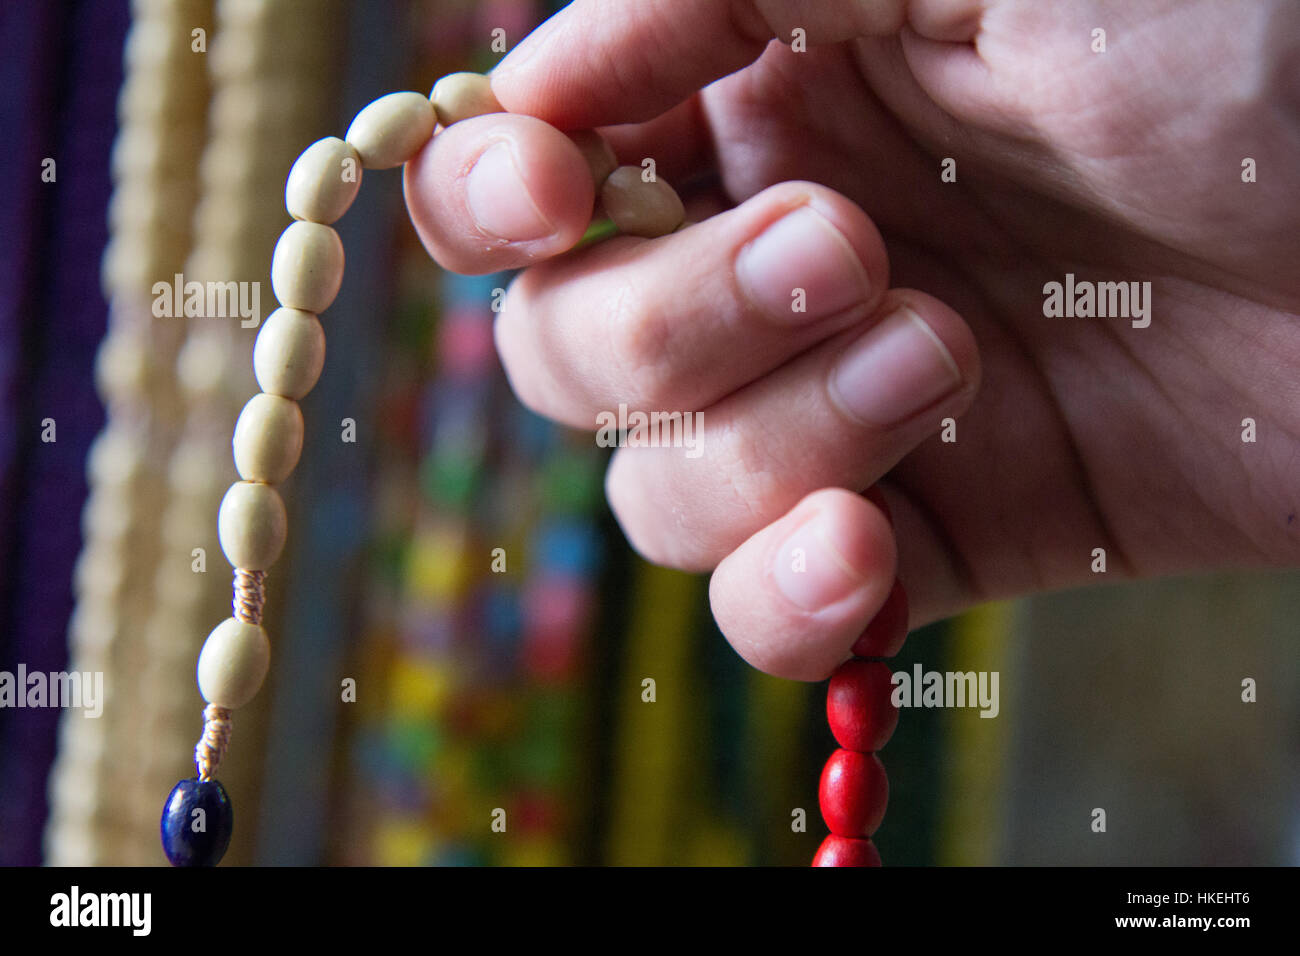 Praying the rosary with the rosary beads in hand Stock Photo